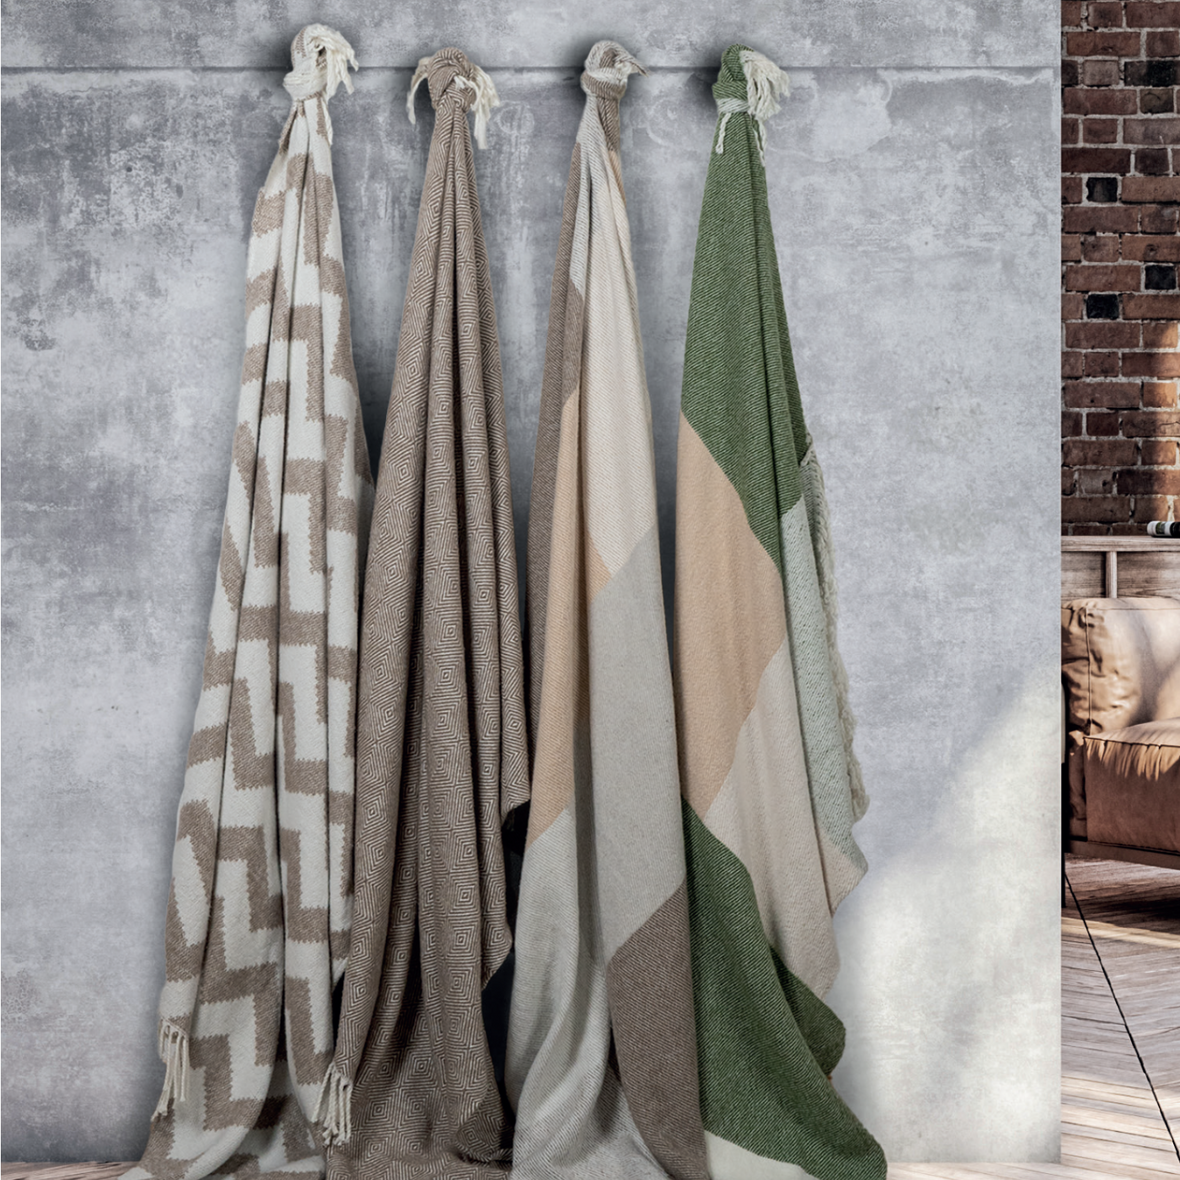 Four Scatterbox throws hanging on a grey wall with different shades of cream, brown, beige and green